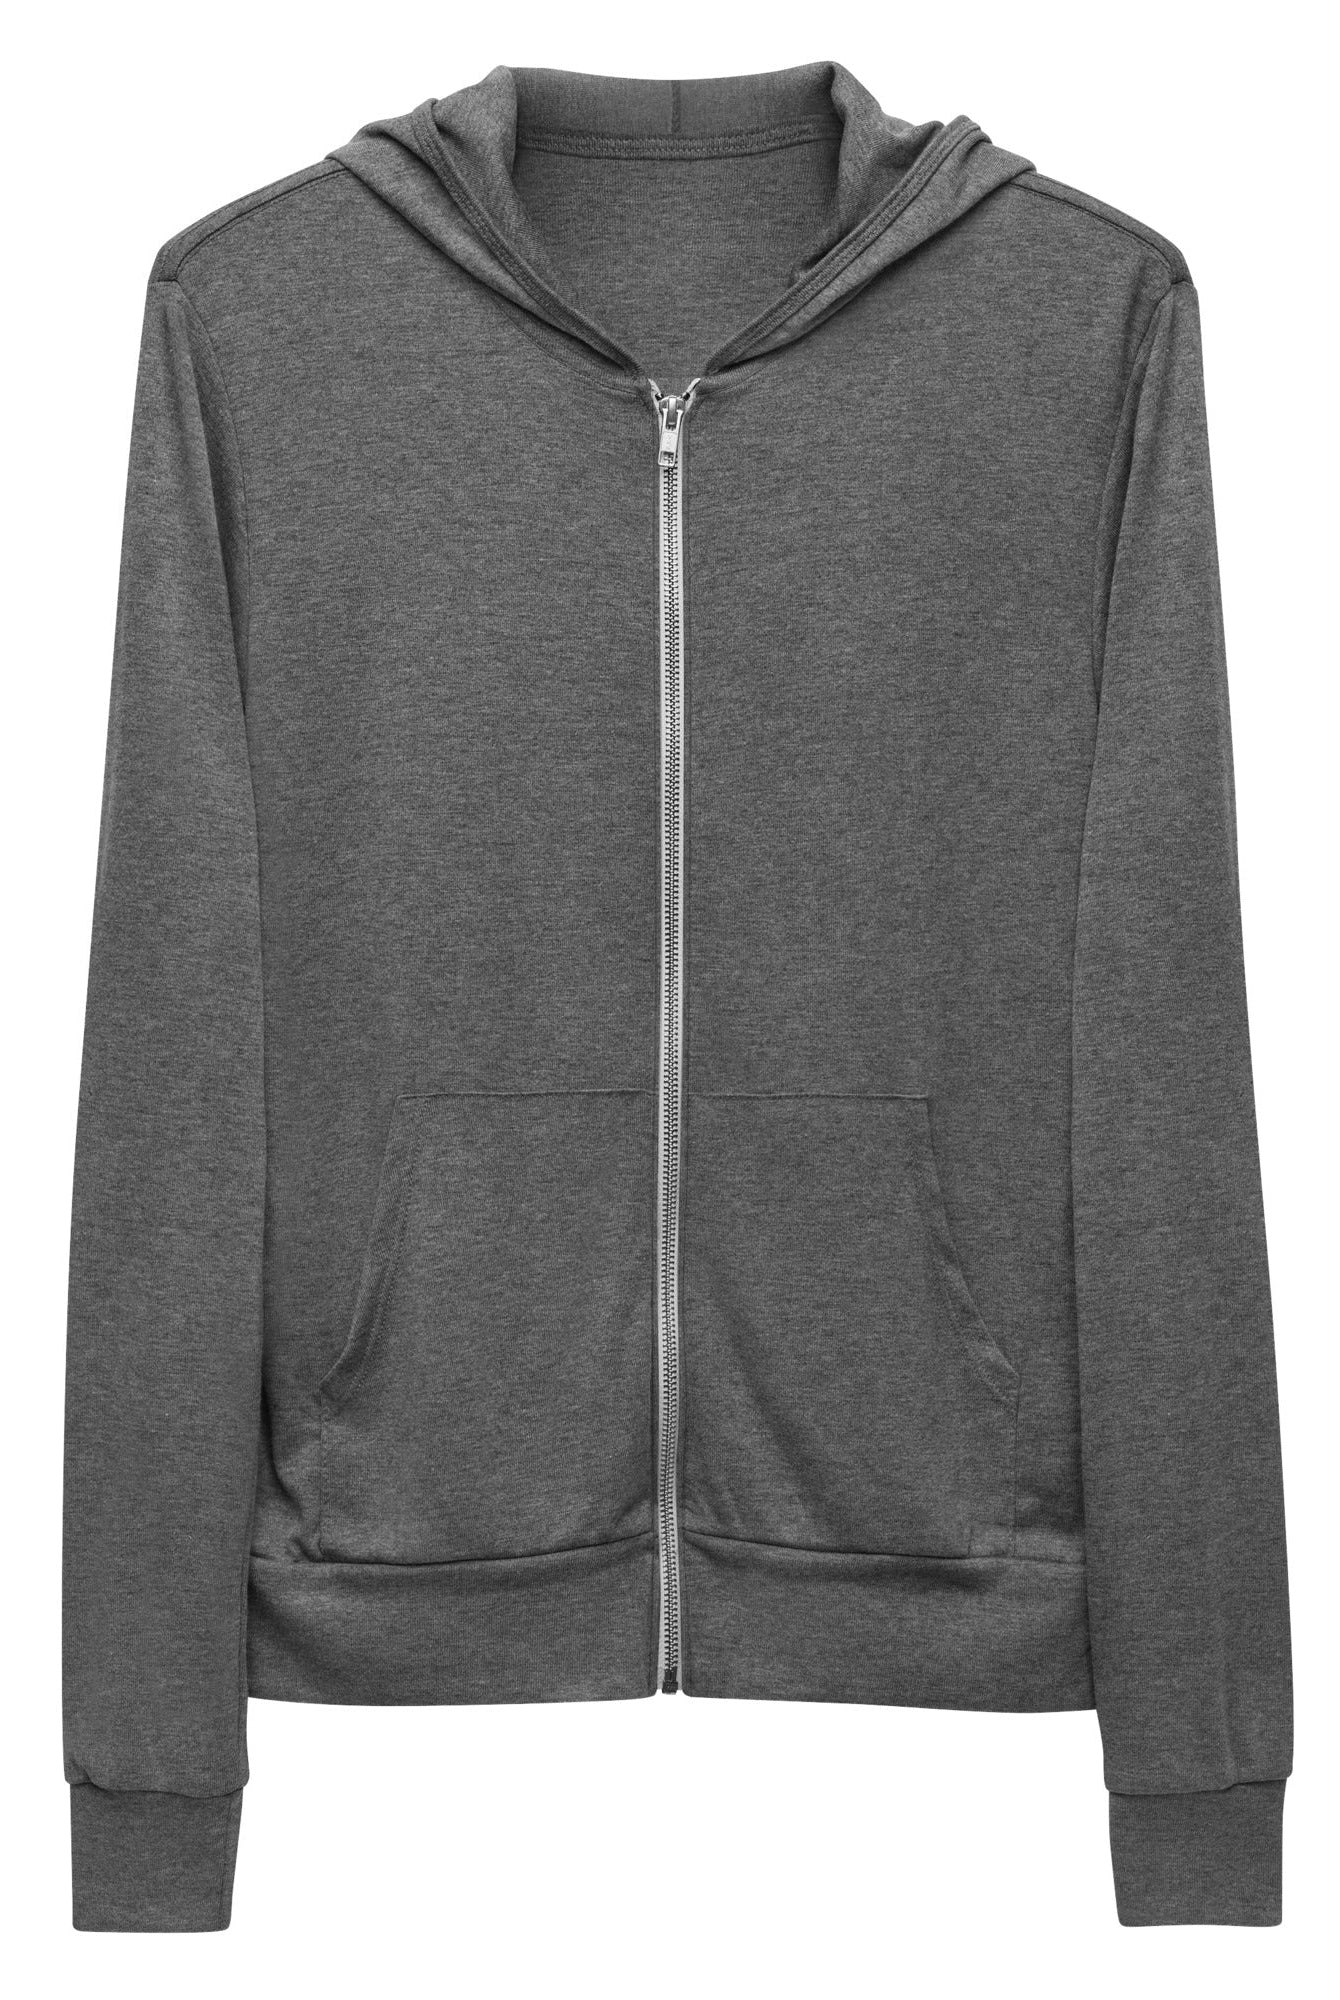 Bellybunny-Women's Zip-Up Hoodie- grey with white logo-front